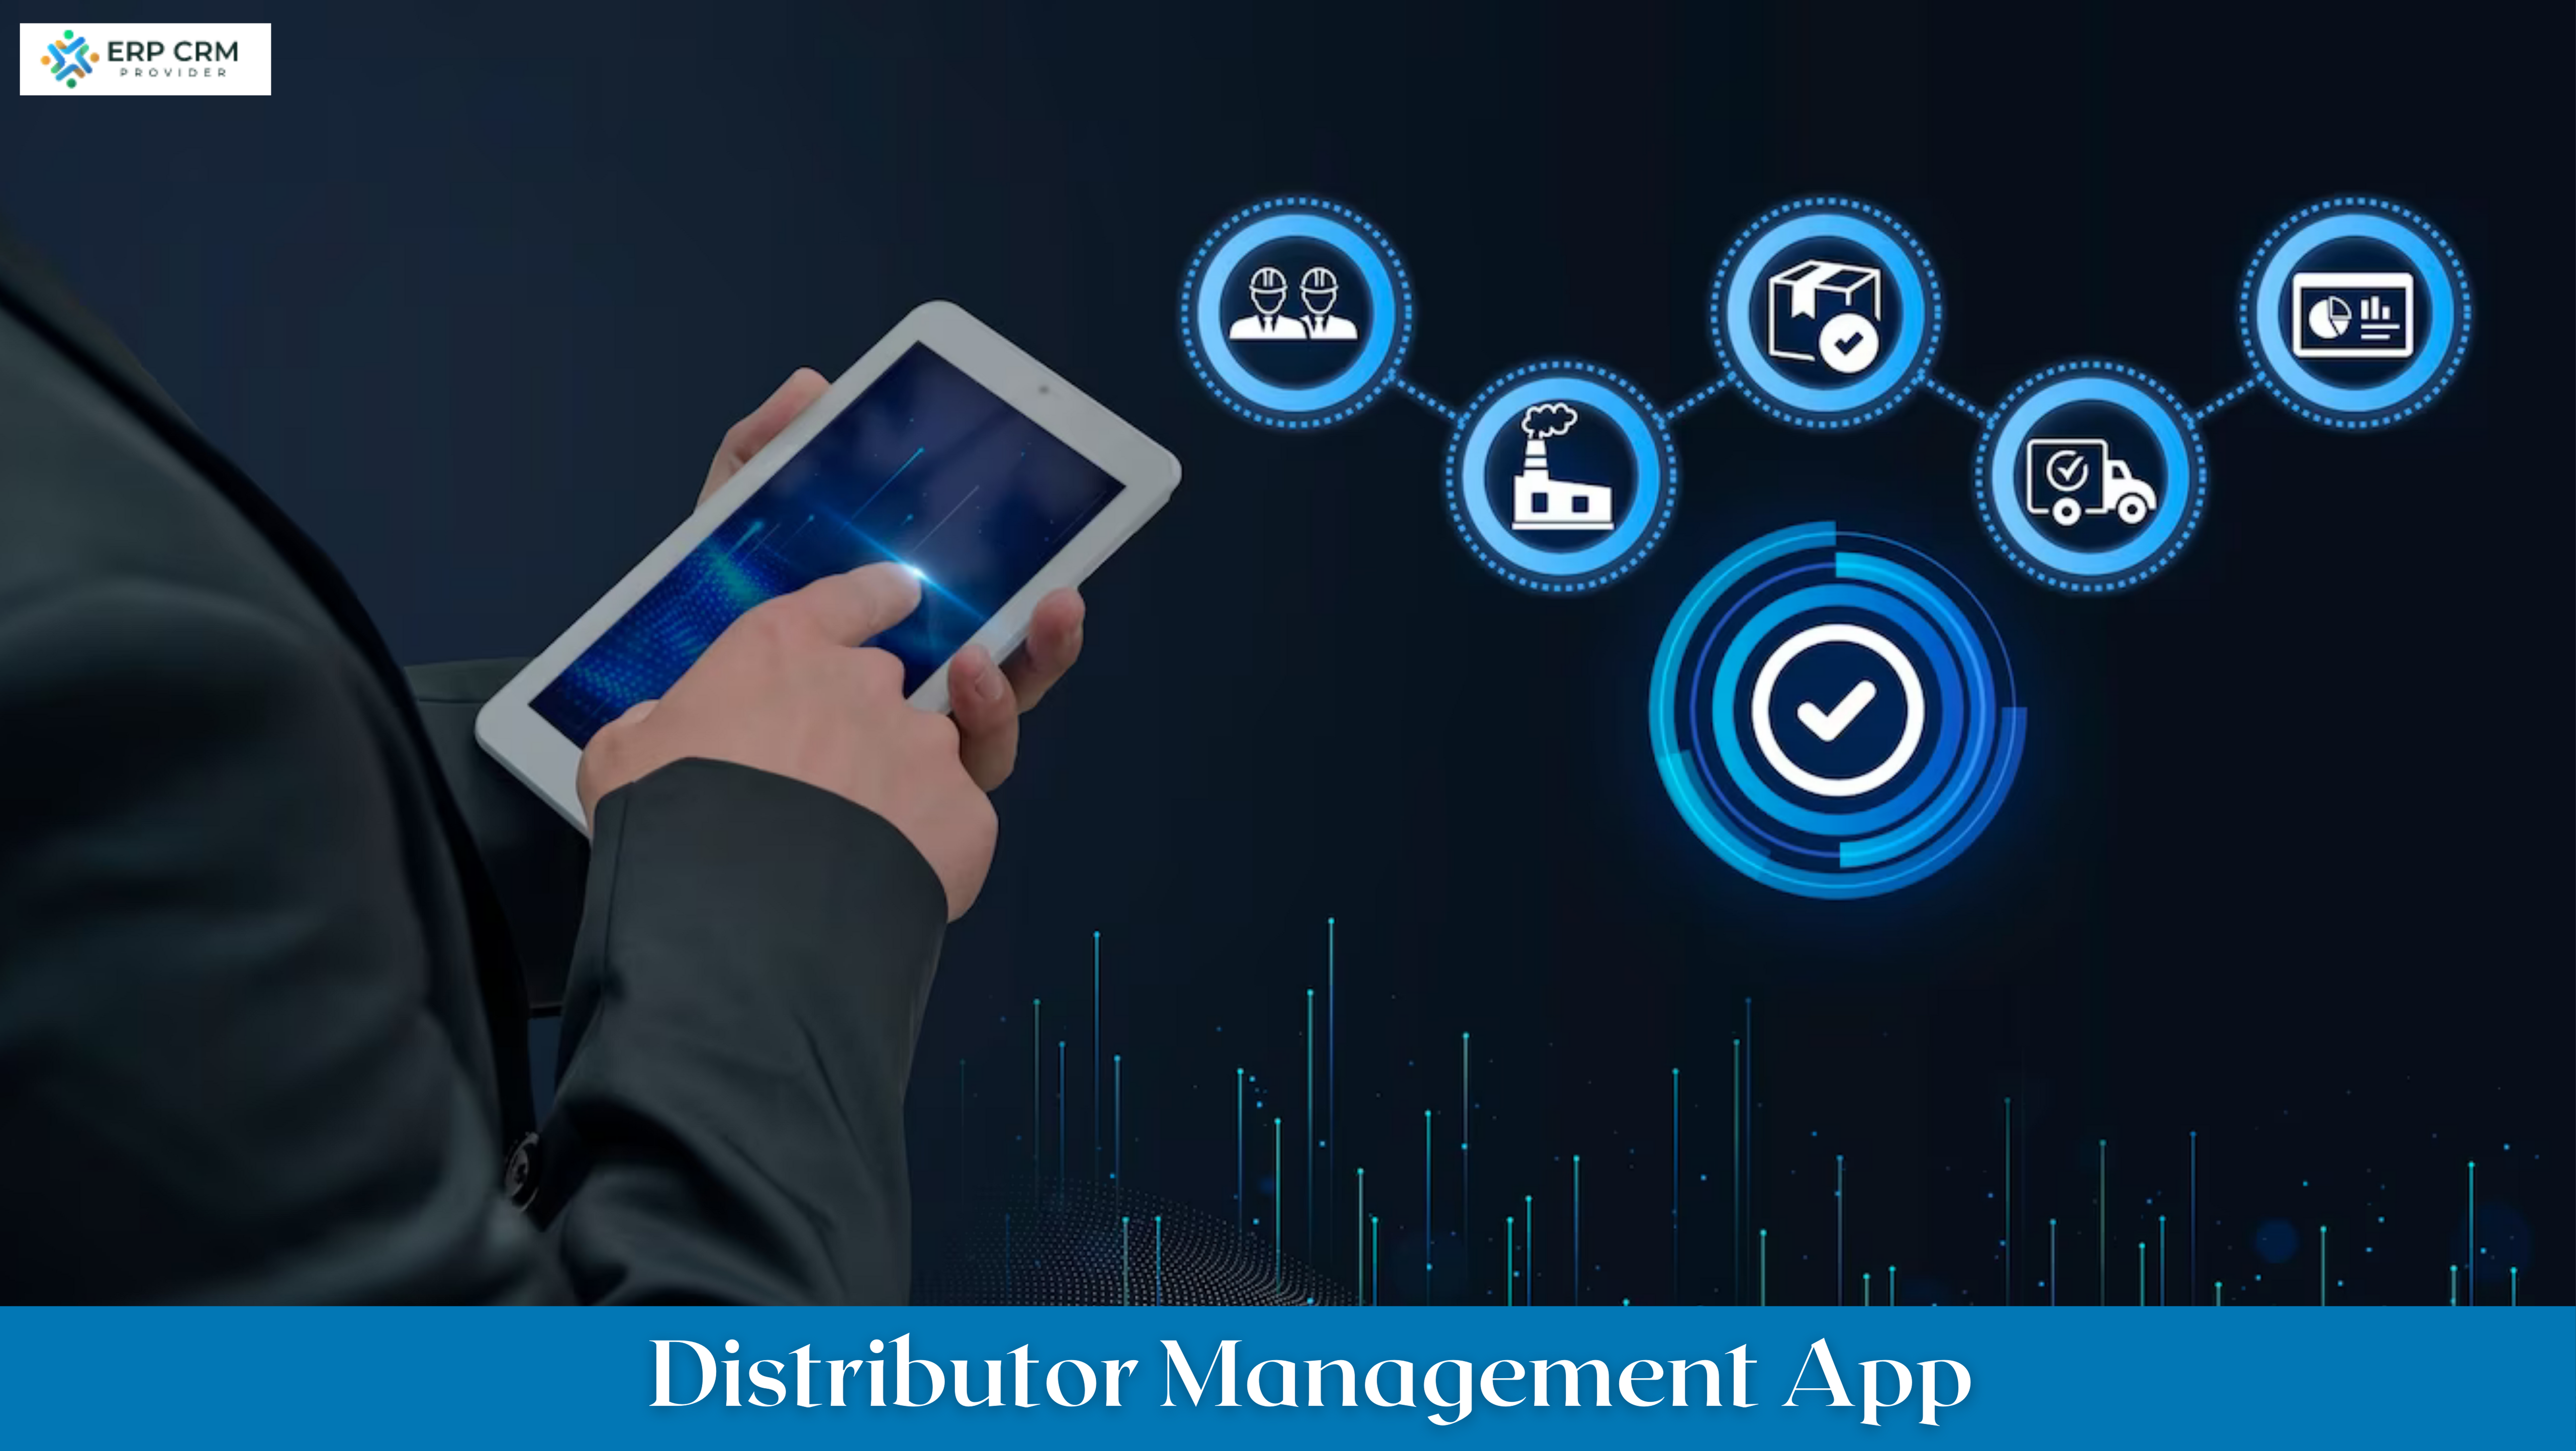 You are currently viewing Using distributor management app to transform the distribution industry.